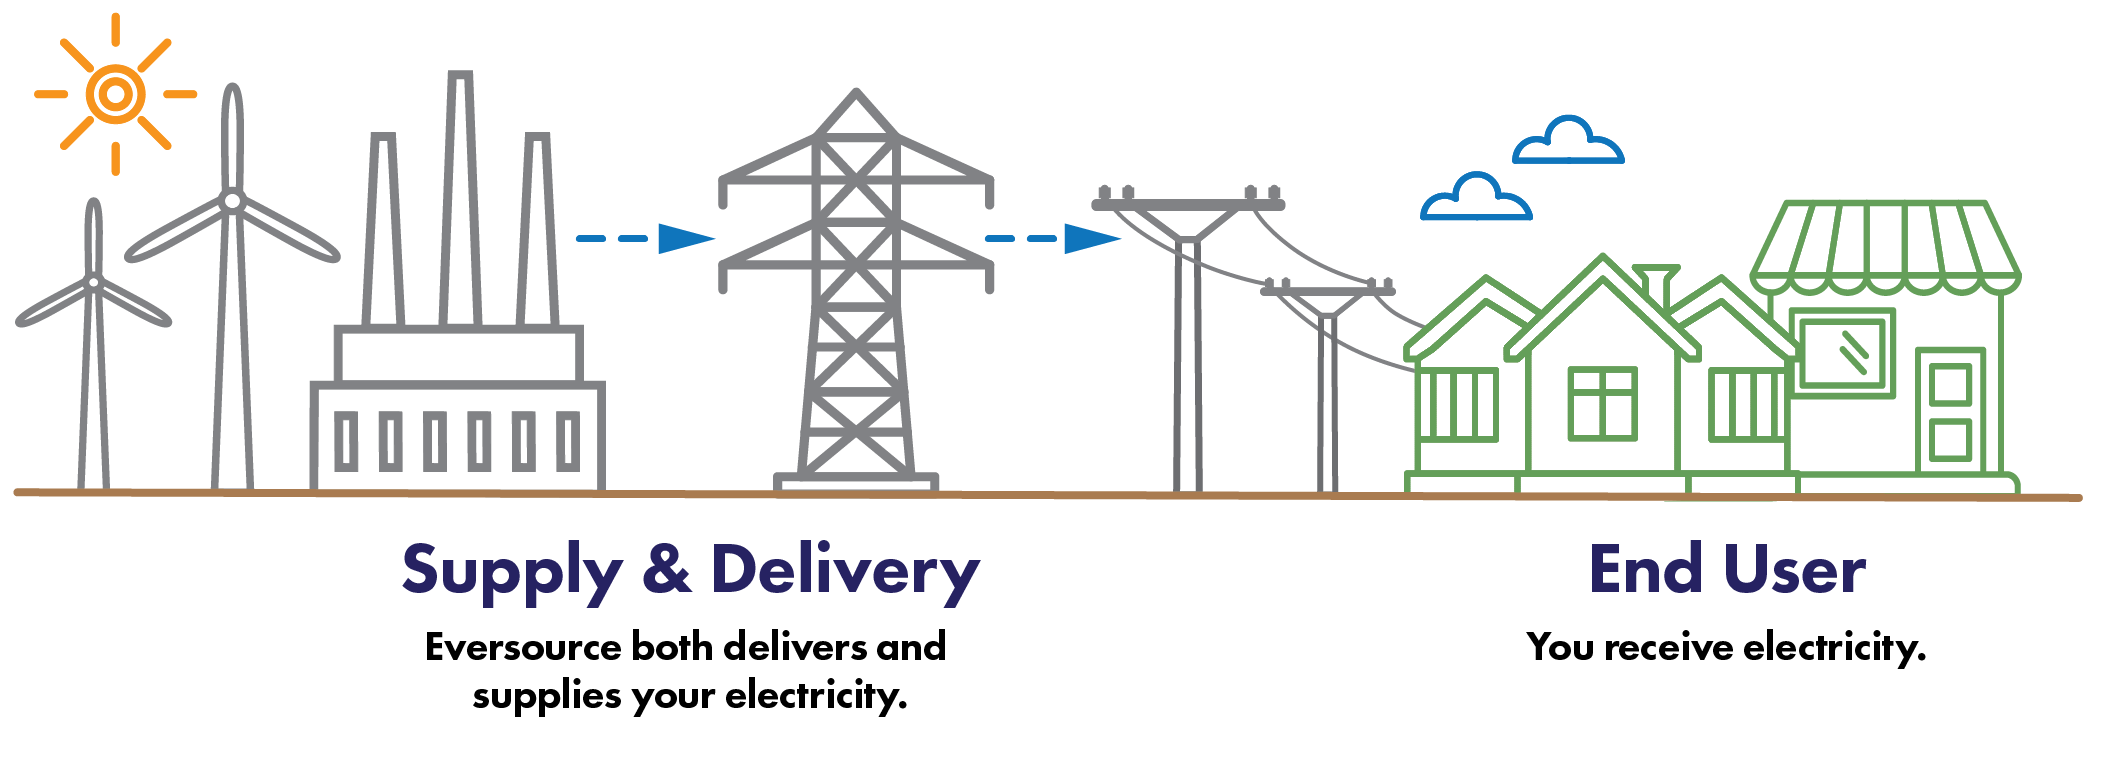 Diagram describing how delivery and supply works without the Cambridge Community Electricity Program. Detailed description above after the header Without the Cambridge Community Electricity Program.